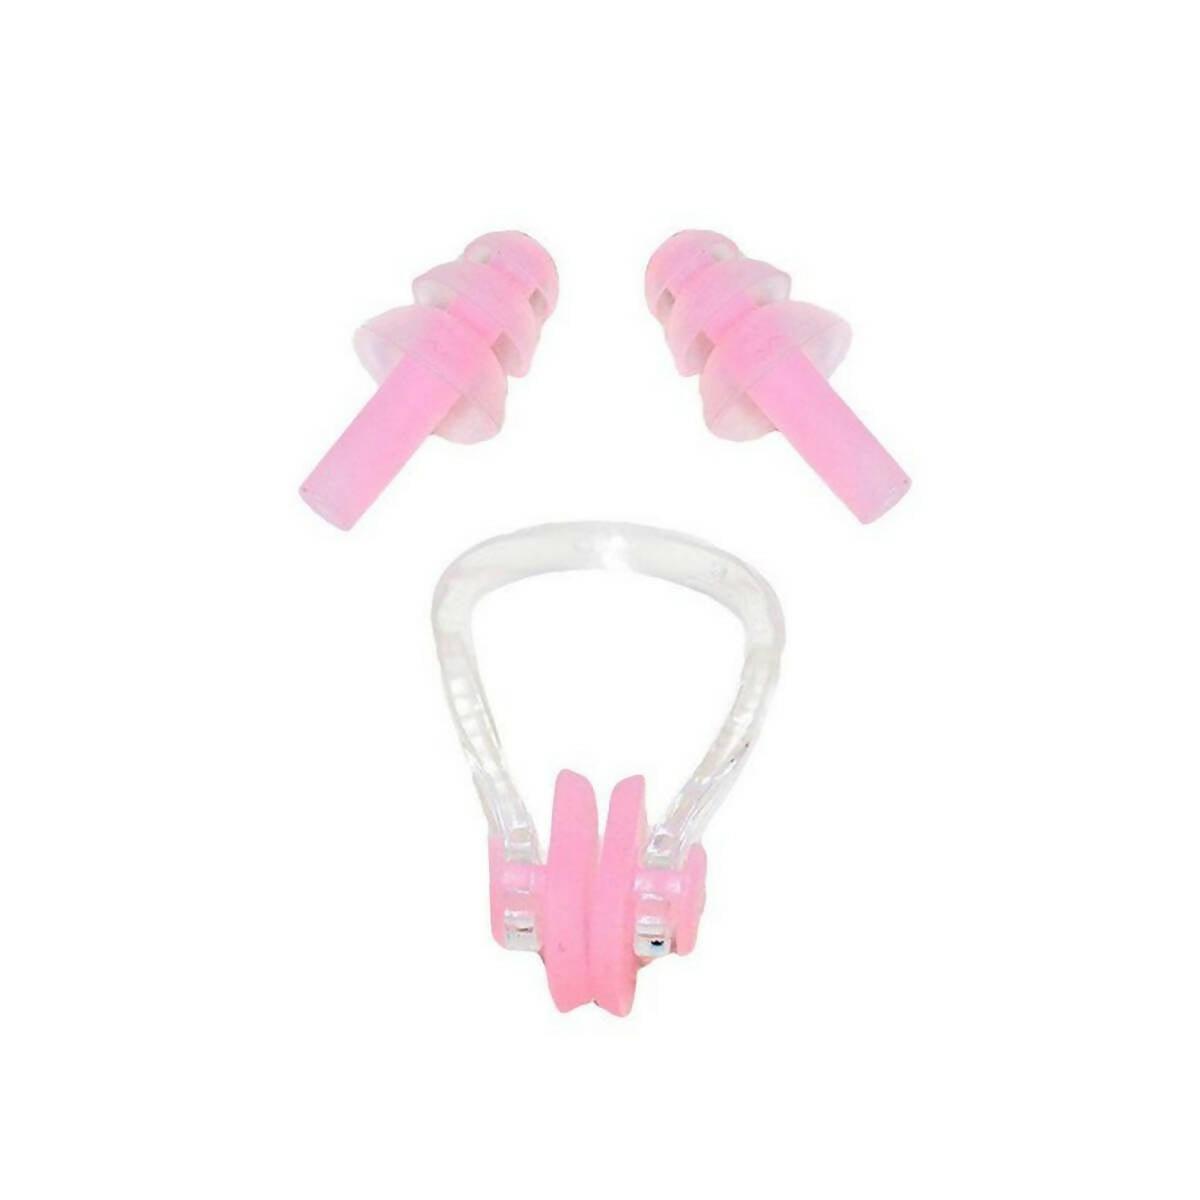 Soft Silicone Swimming Set Waterproof Nose Clip Ear Plug Set with Protective Case - Pink - ValueBox